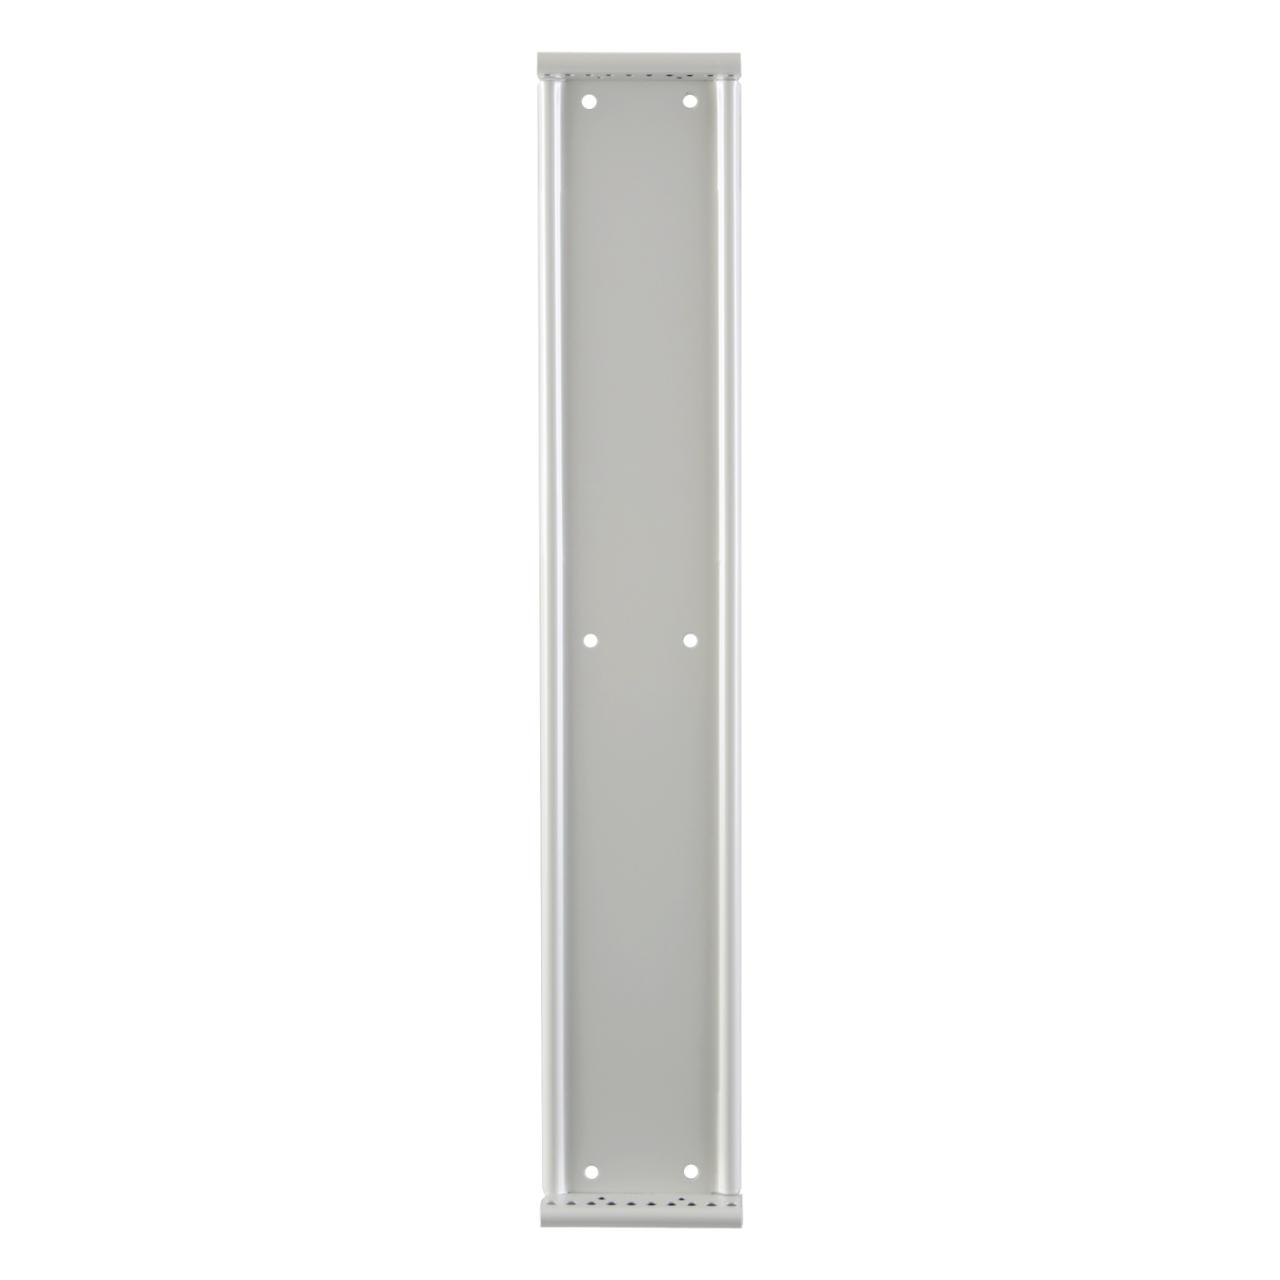 Empty Tarifold Metal Wall Display Unit, A3, for 10 Pockets, without Side Stops